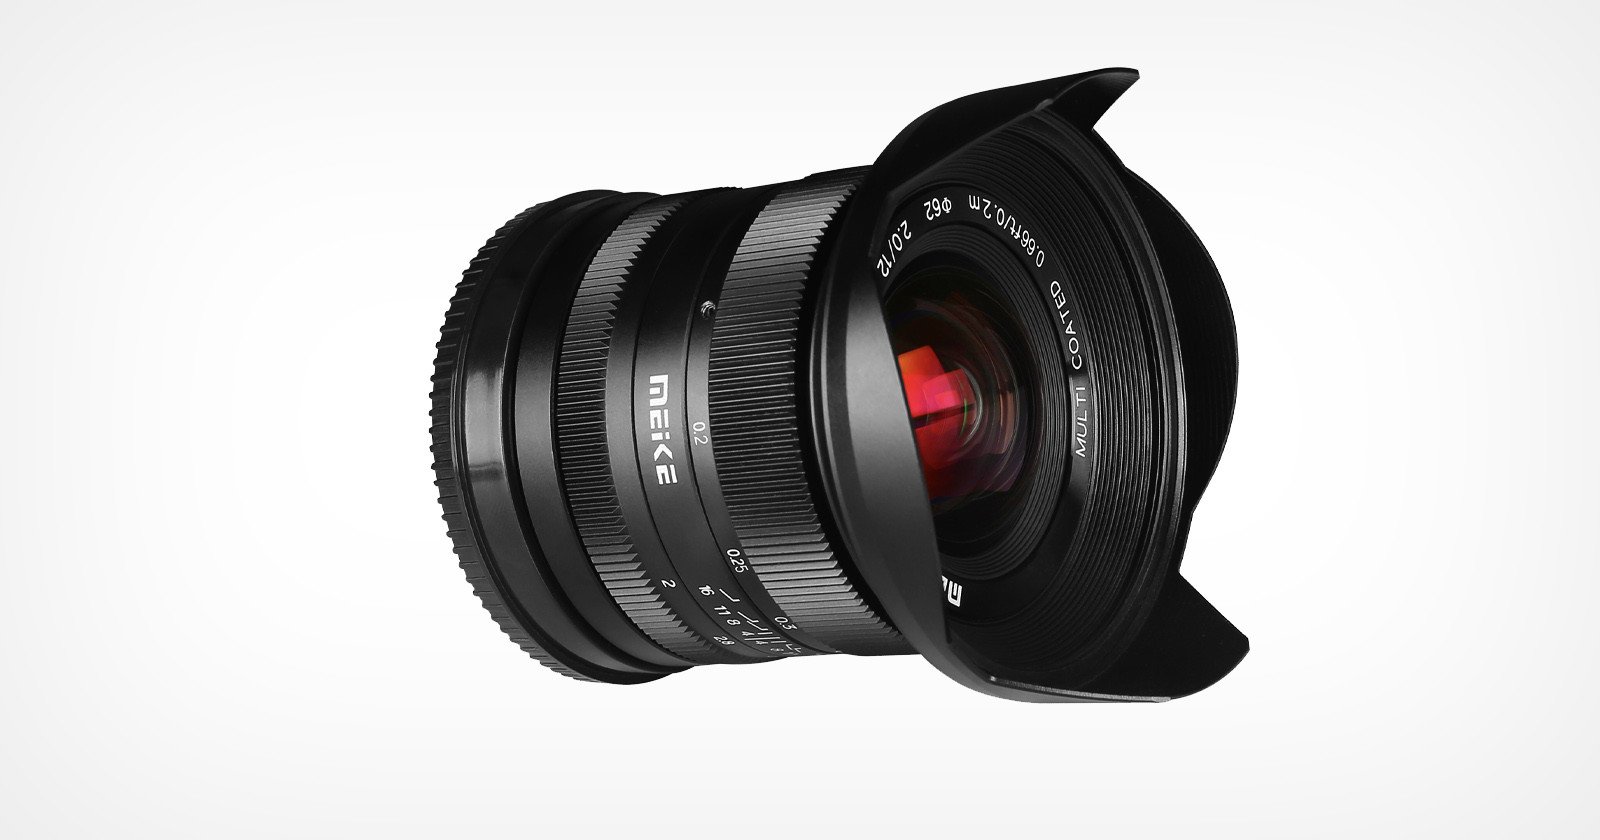 Meike’s New 12mm f/2 APS-C Lens is Available for Five Mounts